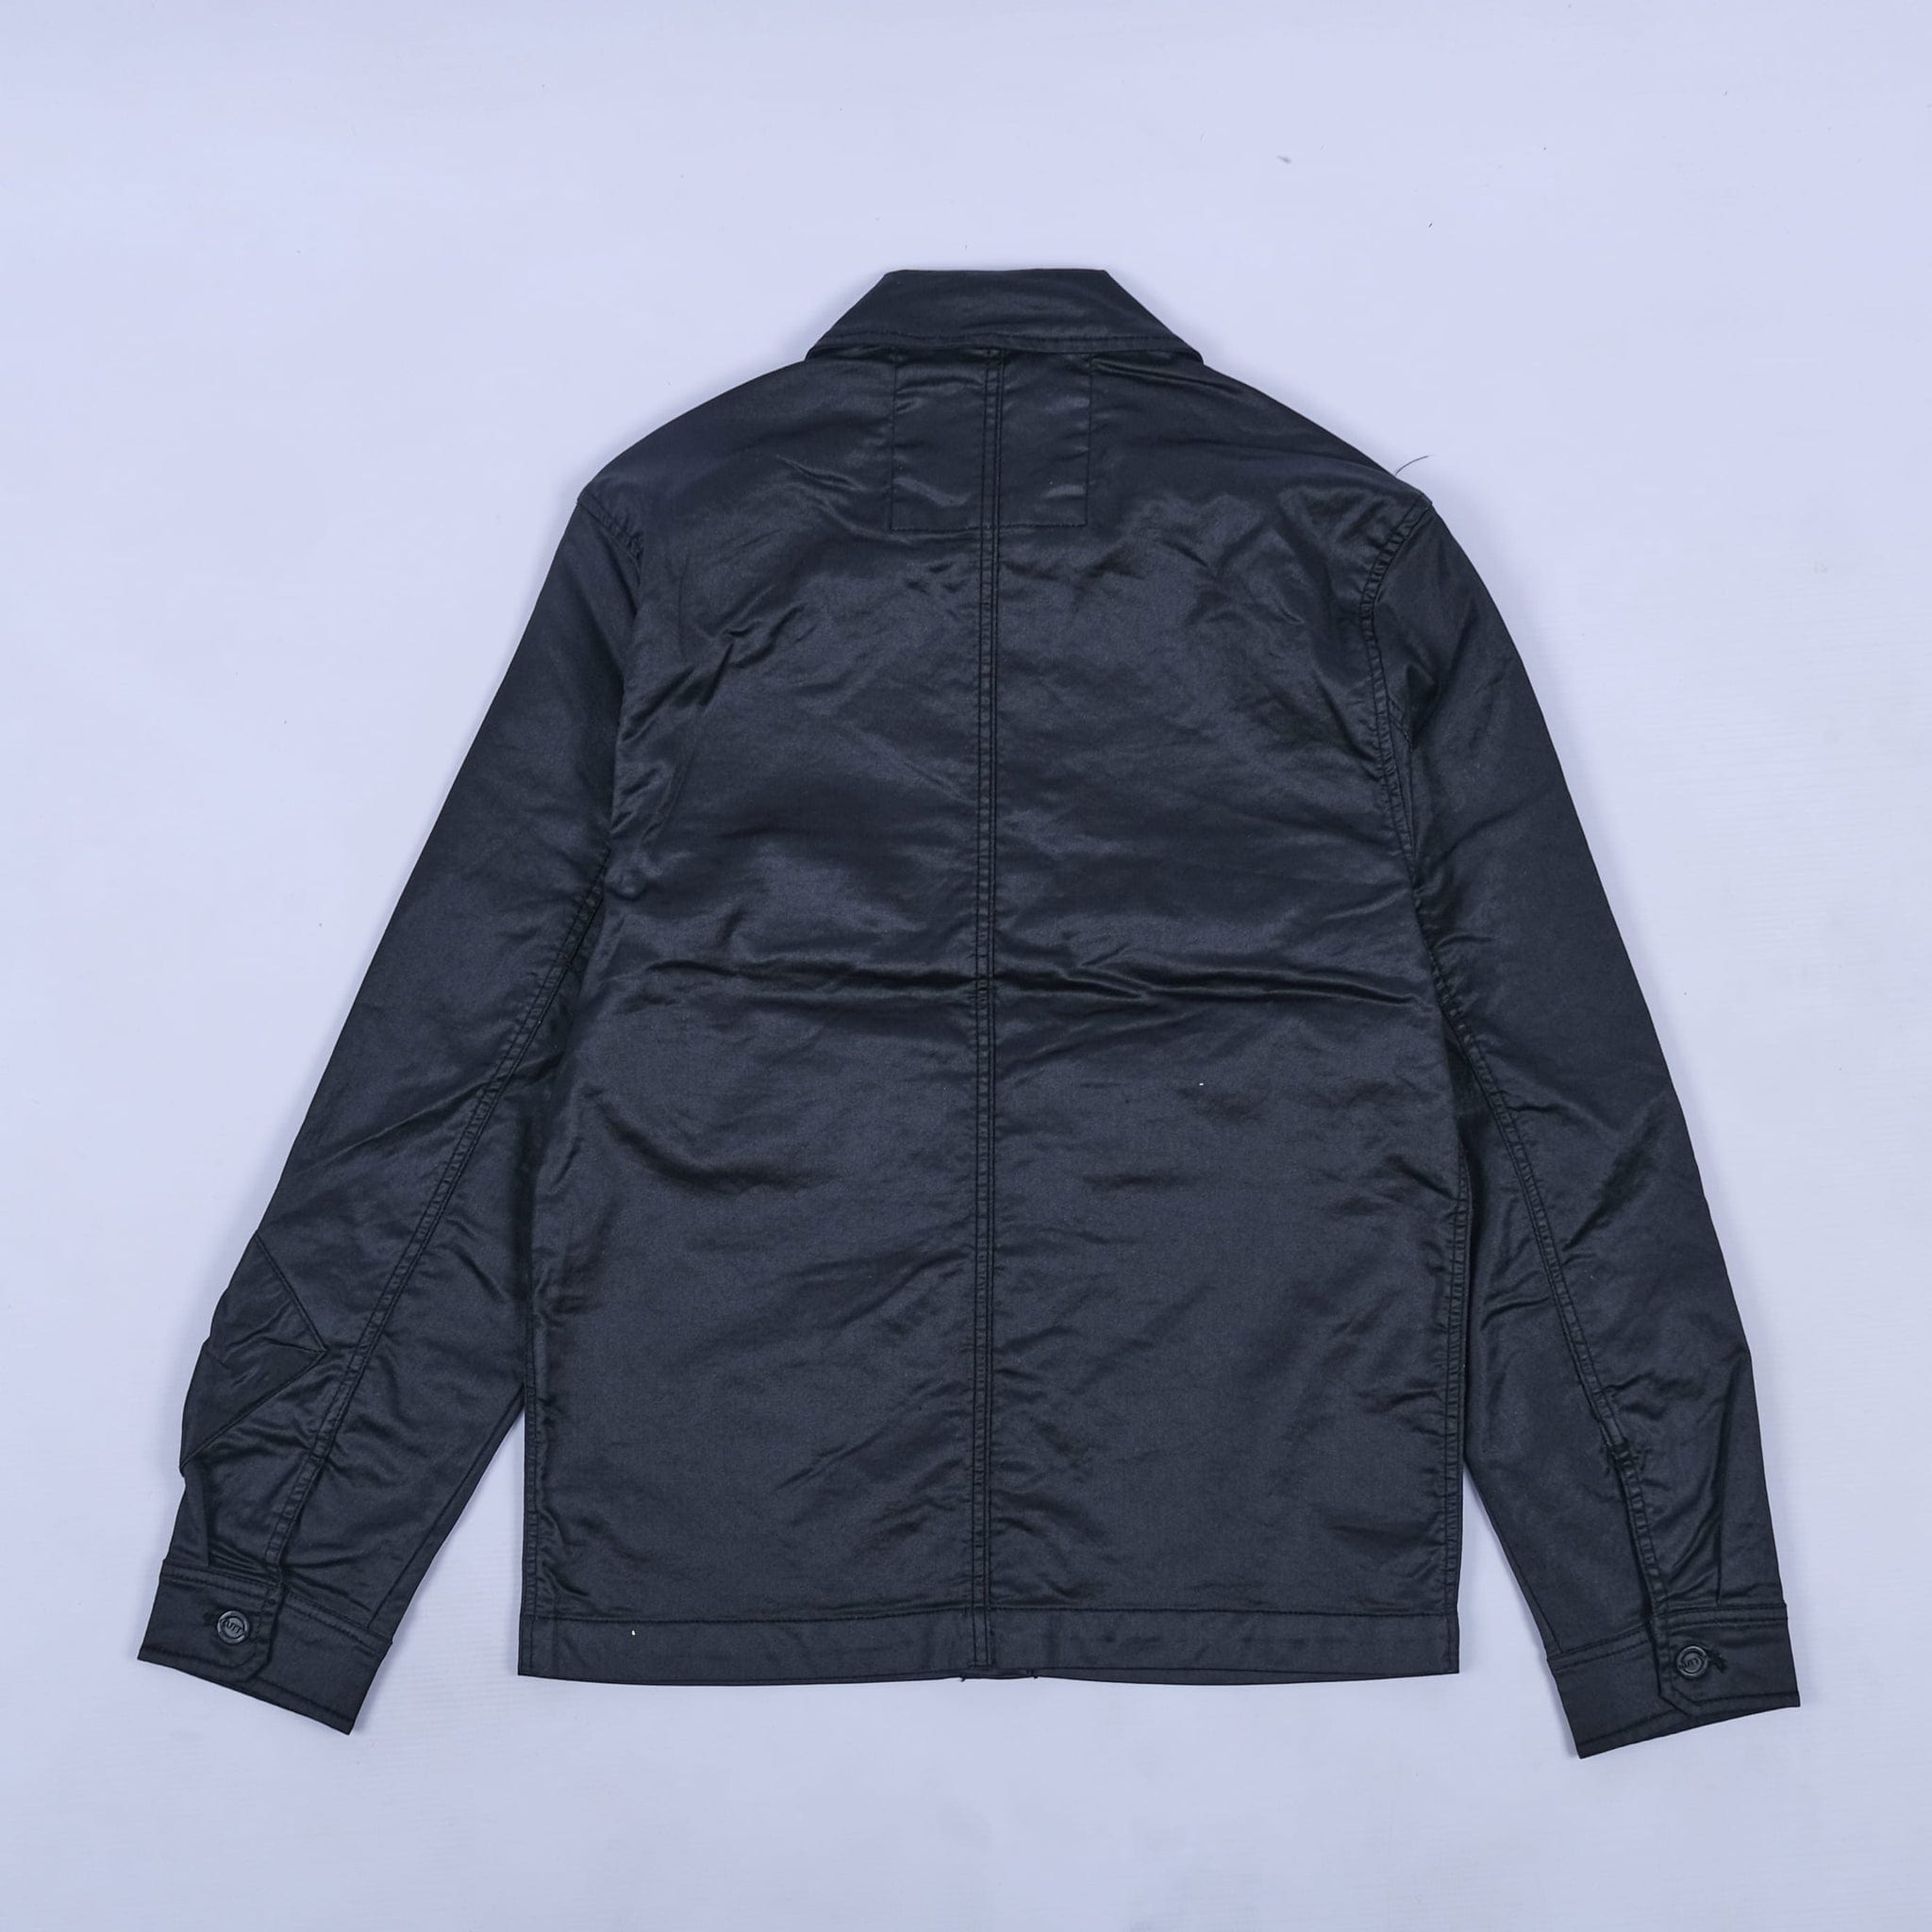 Cutty Camino Jacket Black for Sale ️ Lowest Price Guaranteed